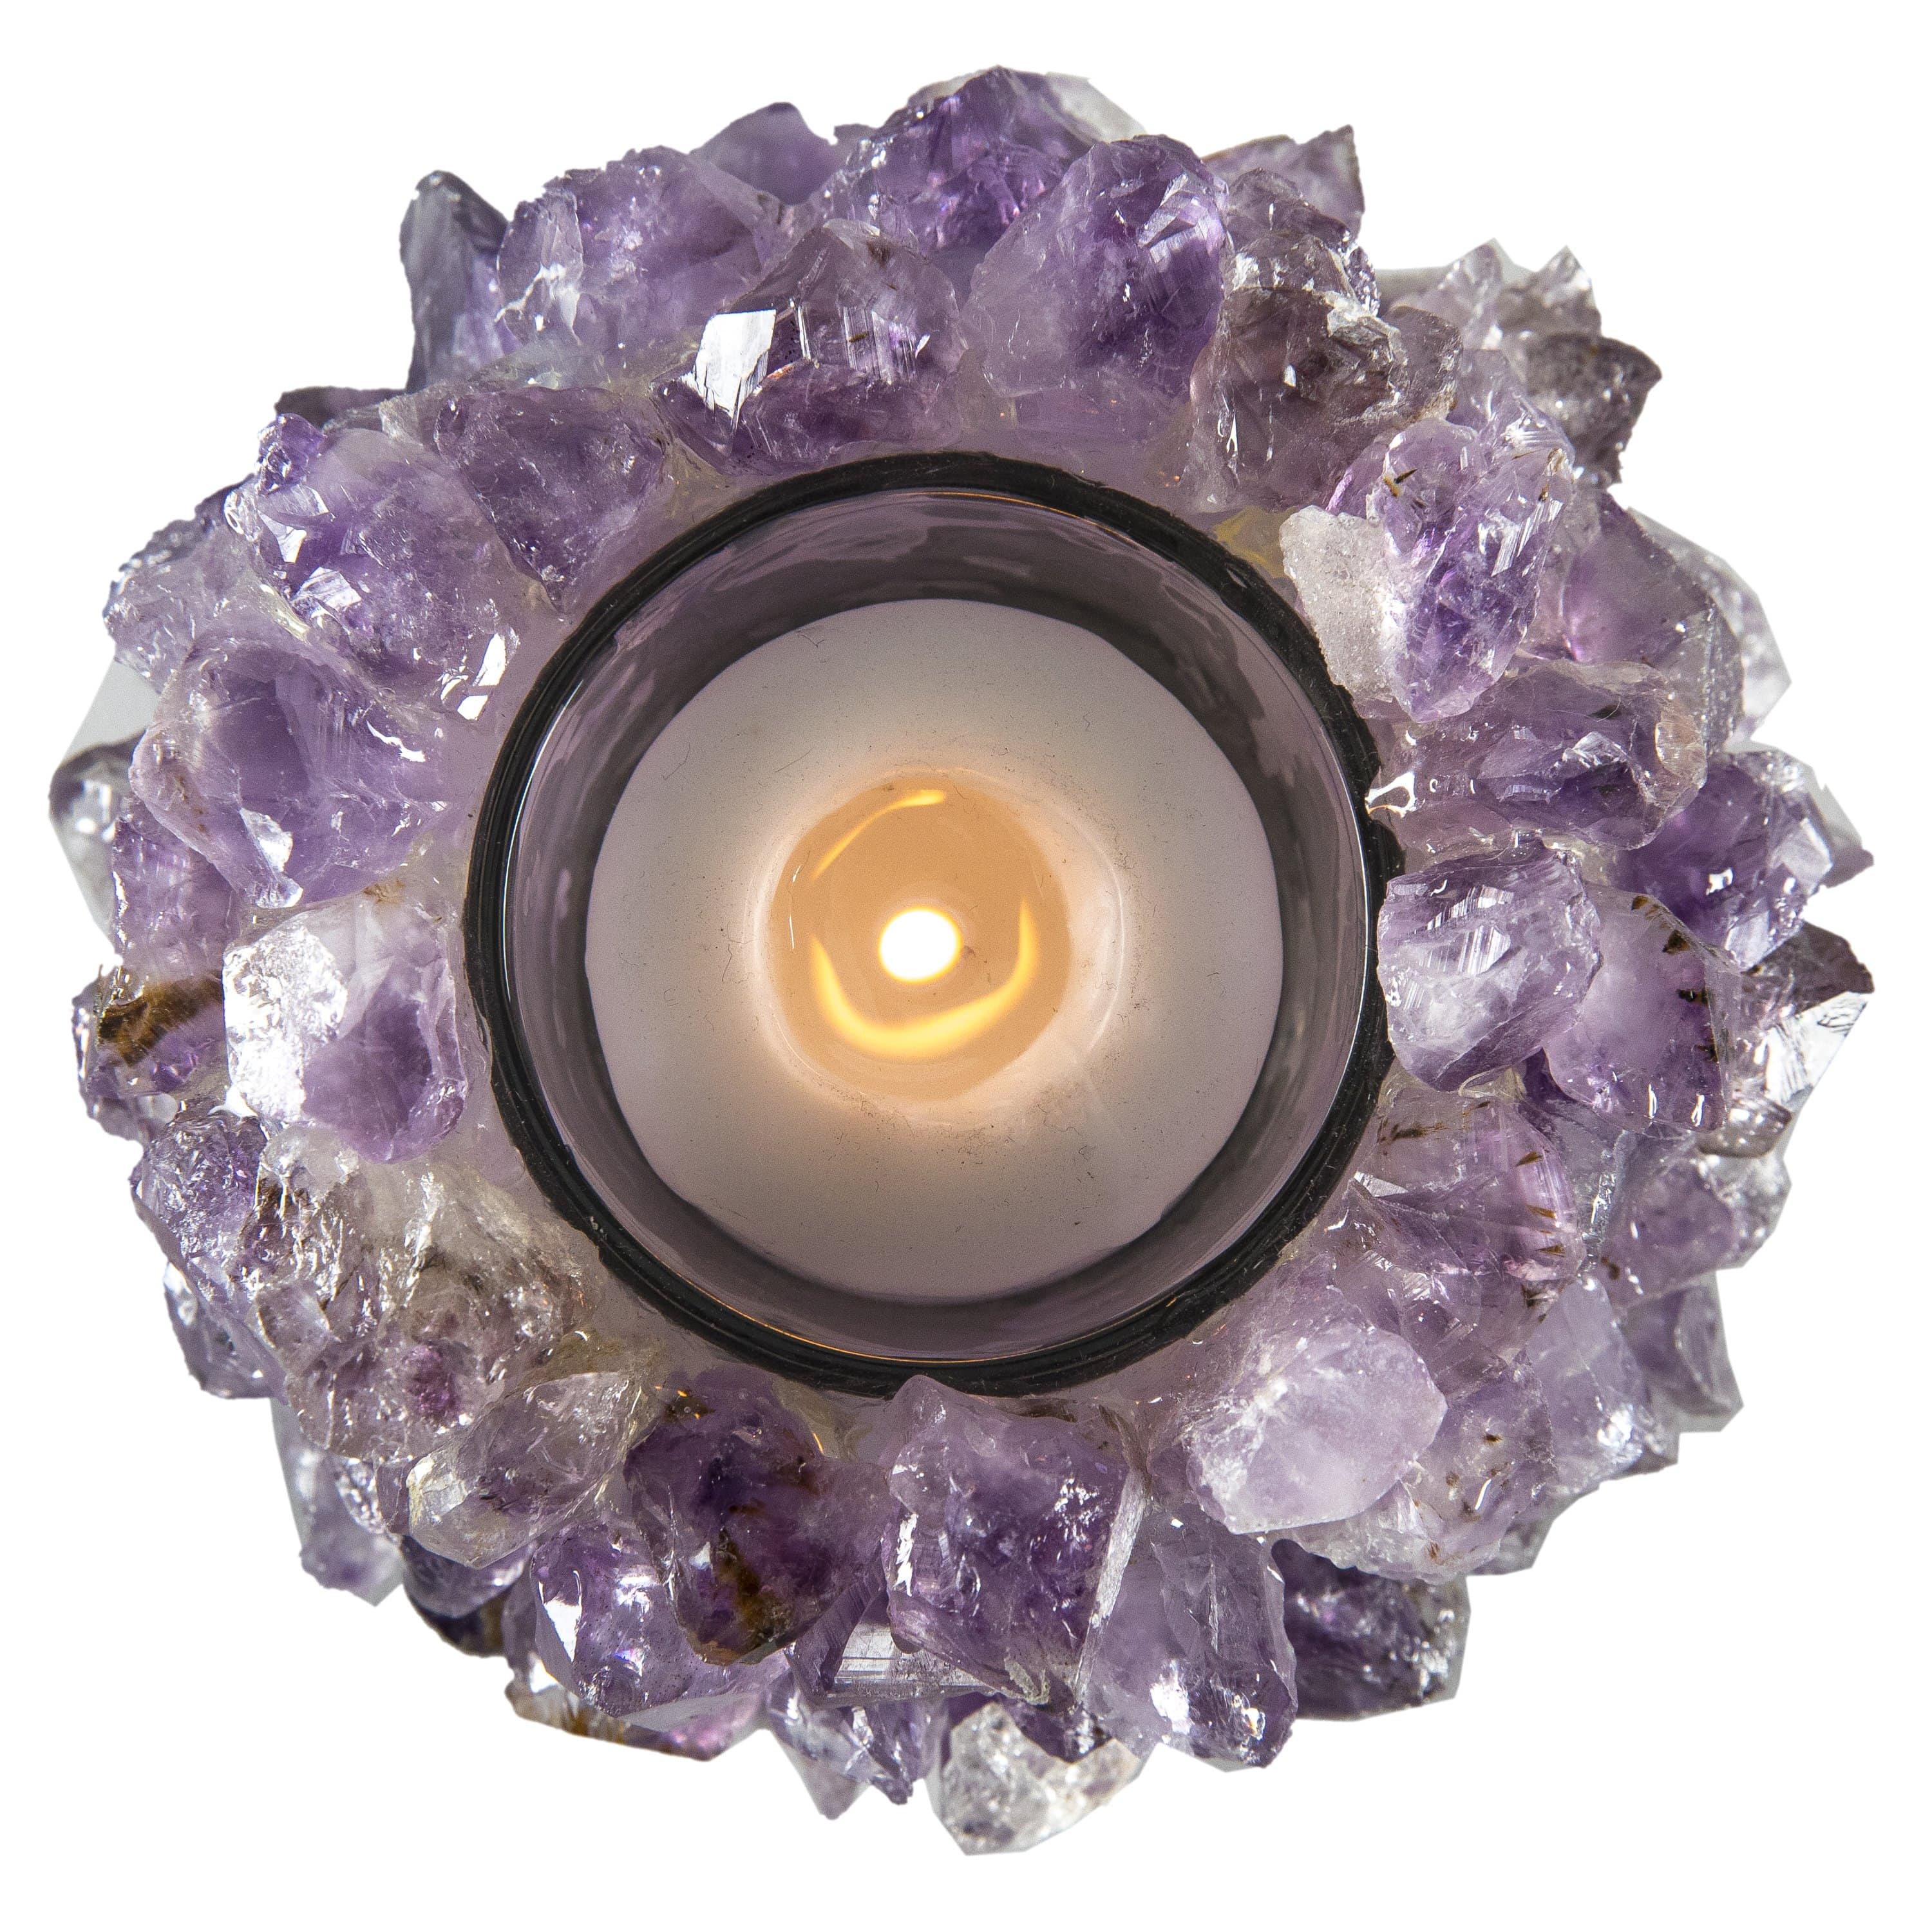 Kalifano Candle Holders Natural Amethyst Cluster Crystal Tealight Candle Holder GCH-08